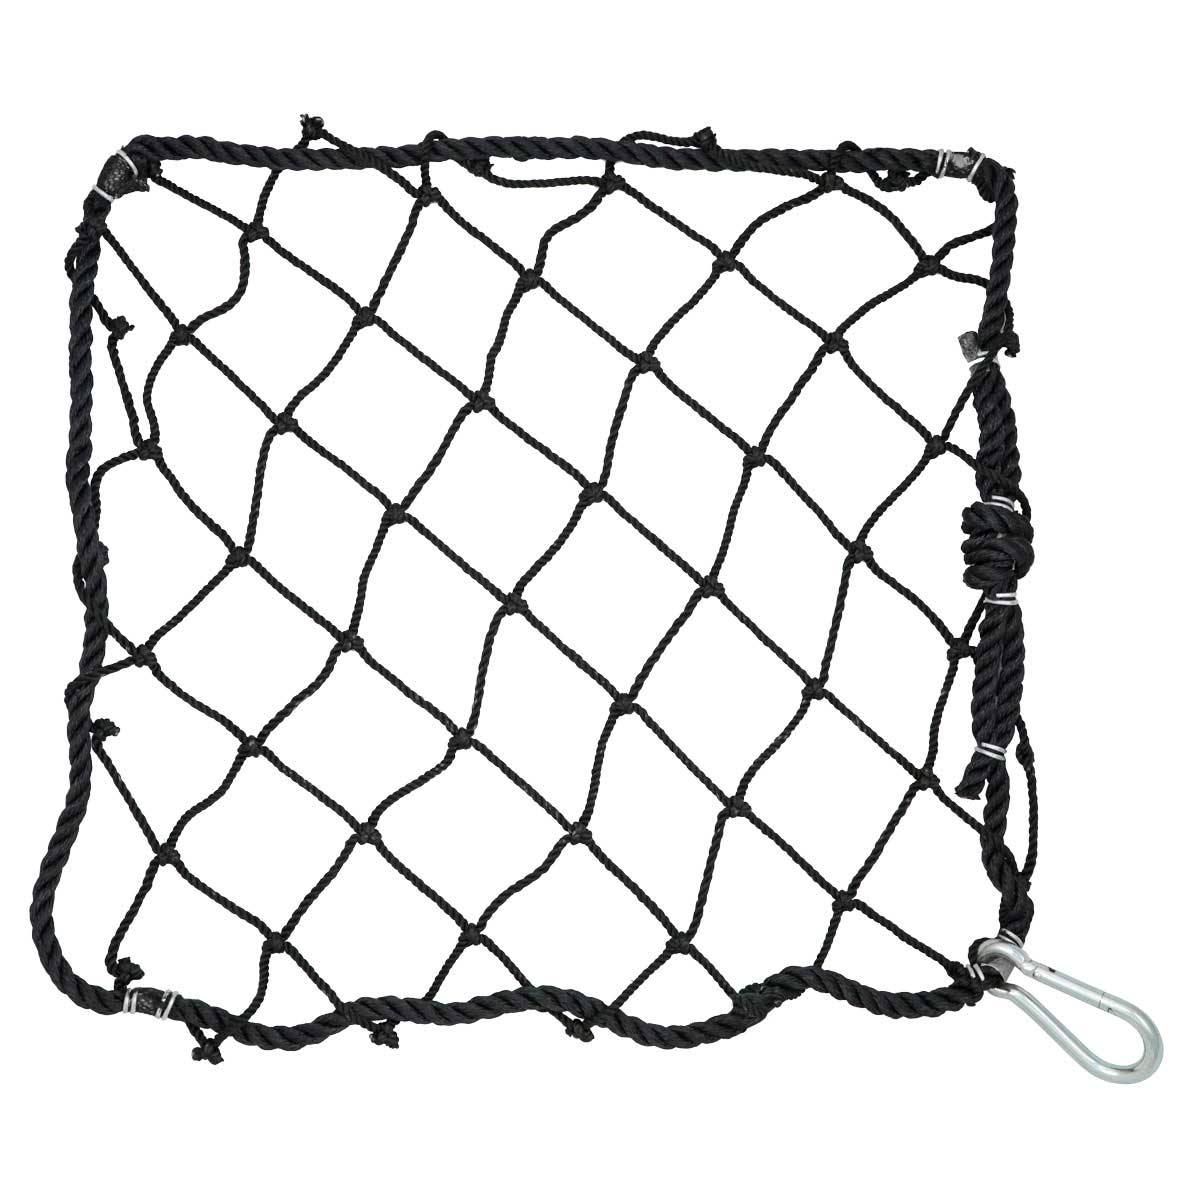 Personnel Safety Net - 25' x 25'